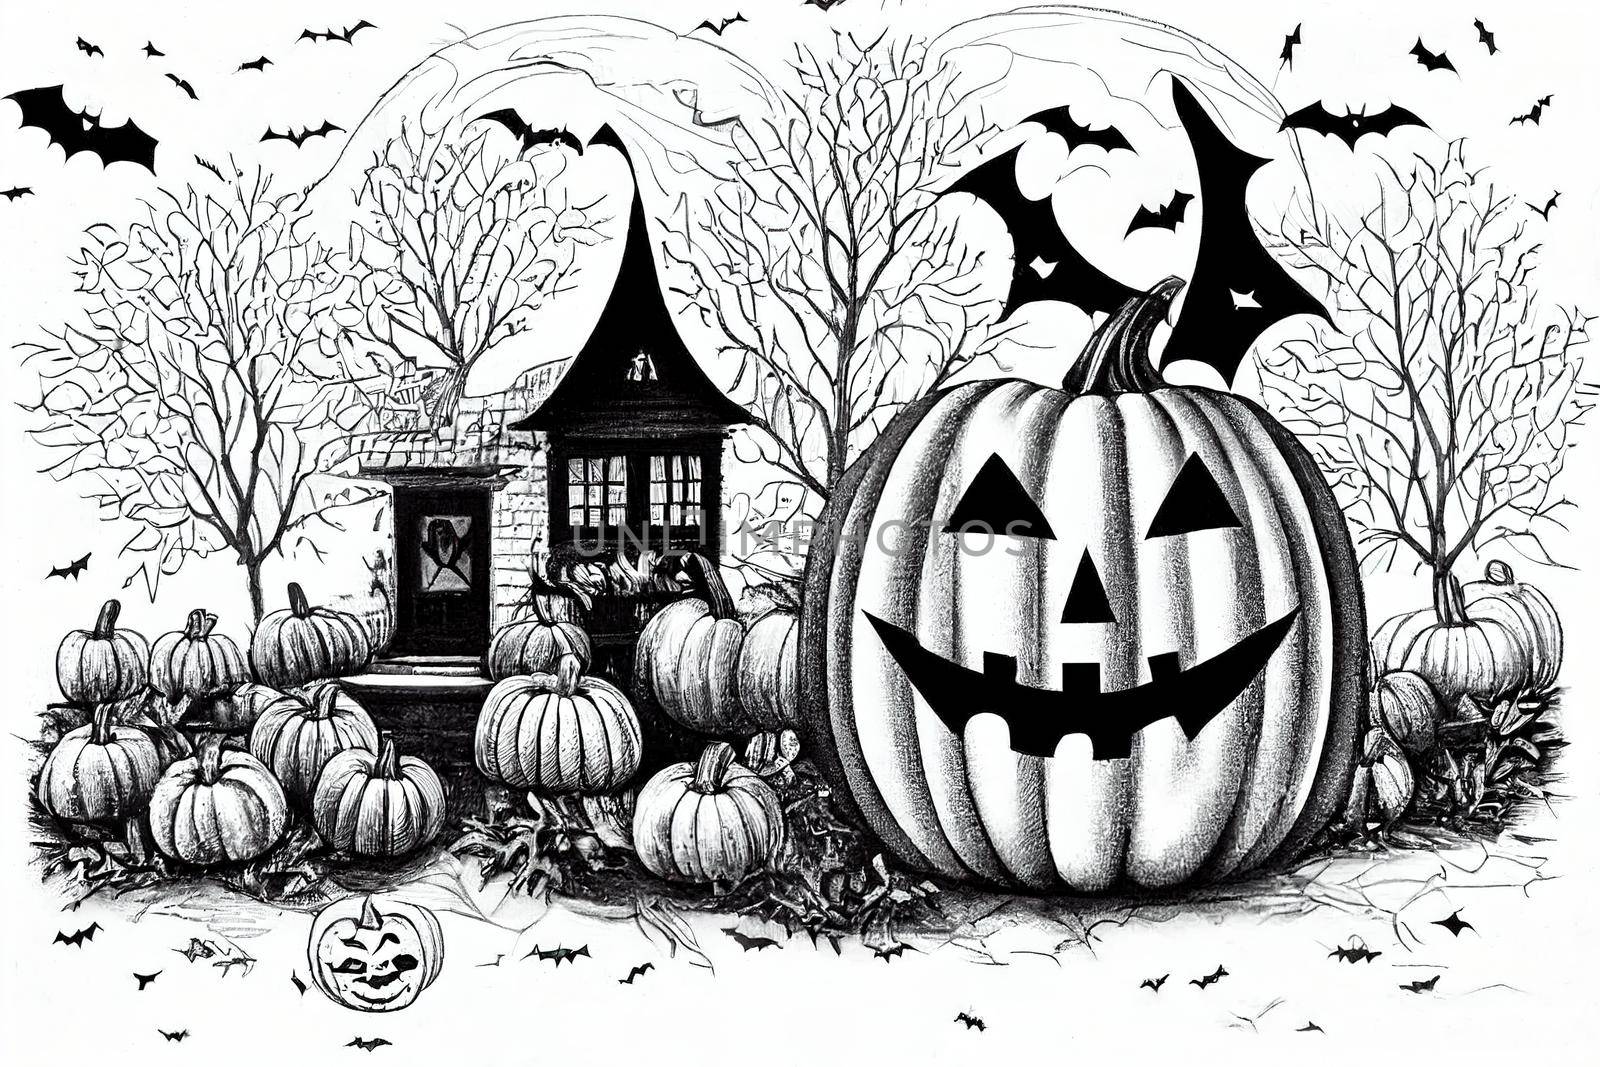 cute coloring page for kids with a pumpkin full of halloween candy, a house, a bat and more, you can print it on paper painting, illustration, drawing v1